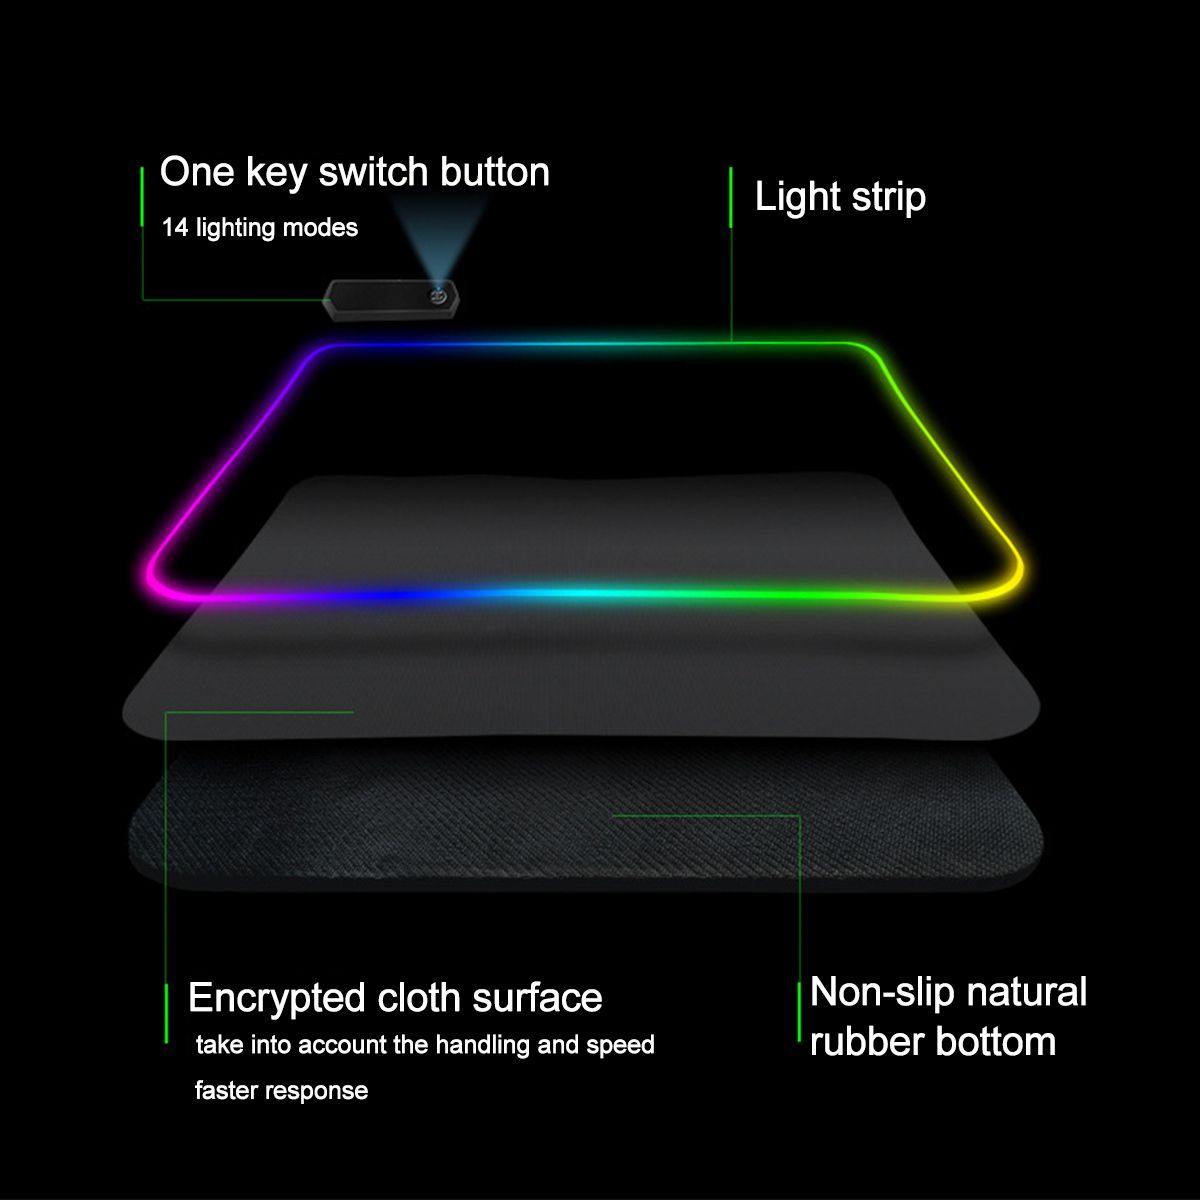 Large-RGB-Mouse-Pad-Gaming-Keyboard-Pad-Non-slip-Rubber-Desktop-Table-Protective-Mat-for-Home-Office-1736165